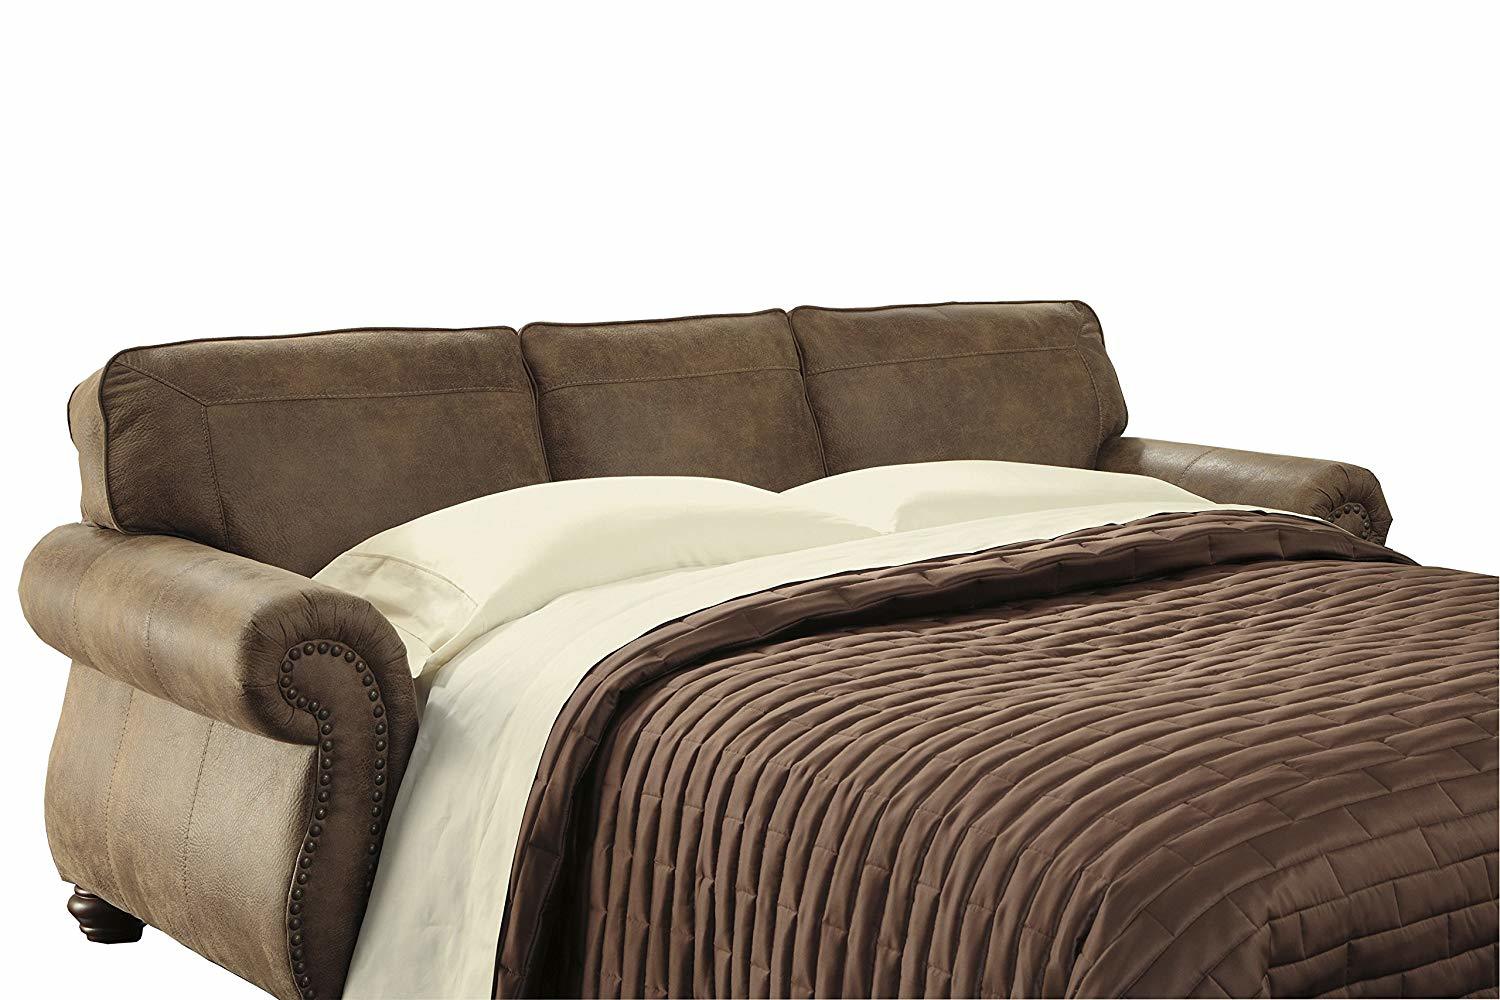 pull out sofa bed that comfortable full size